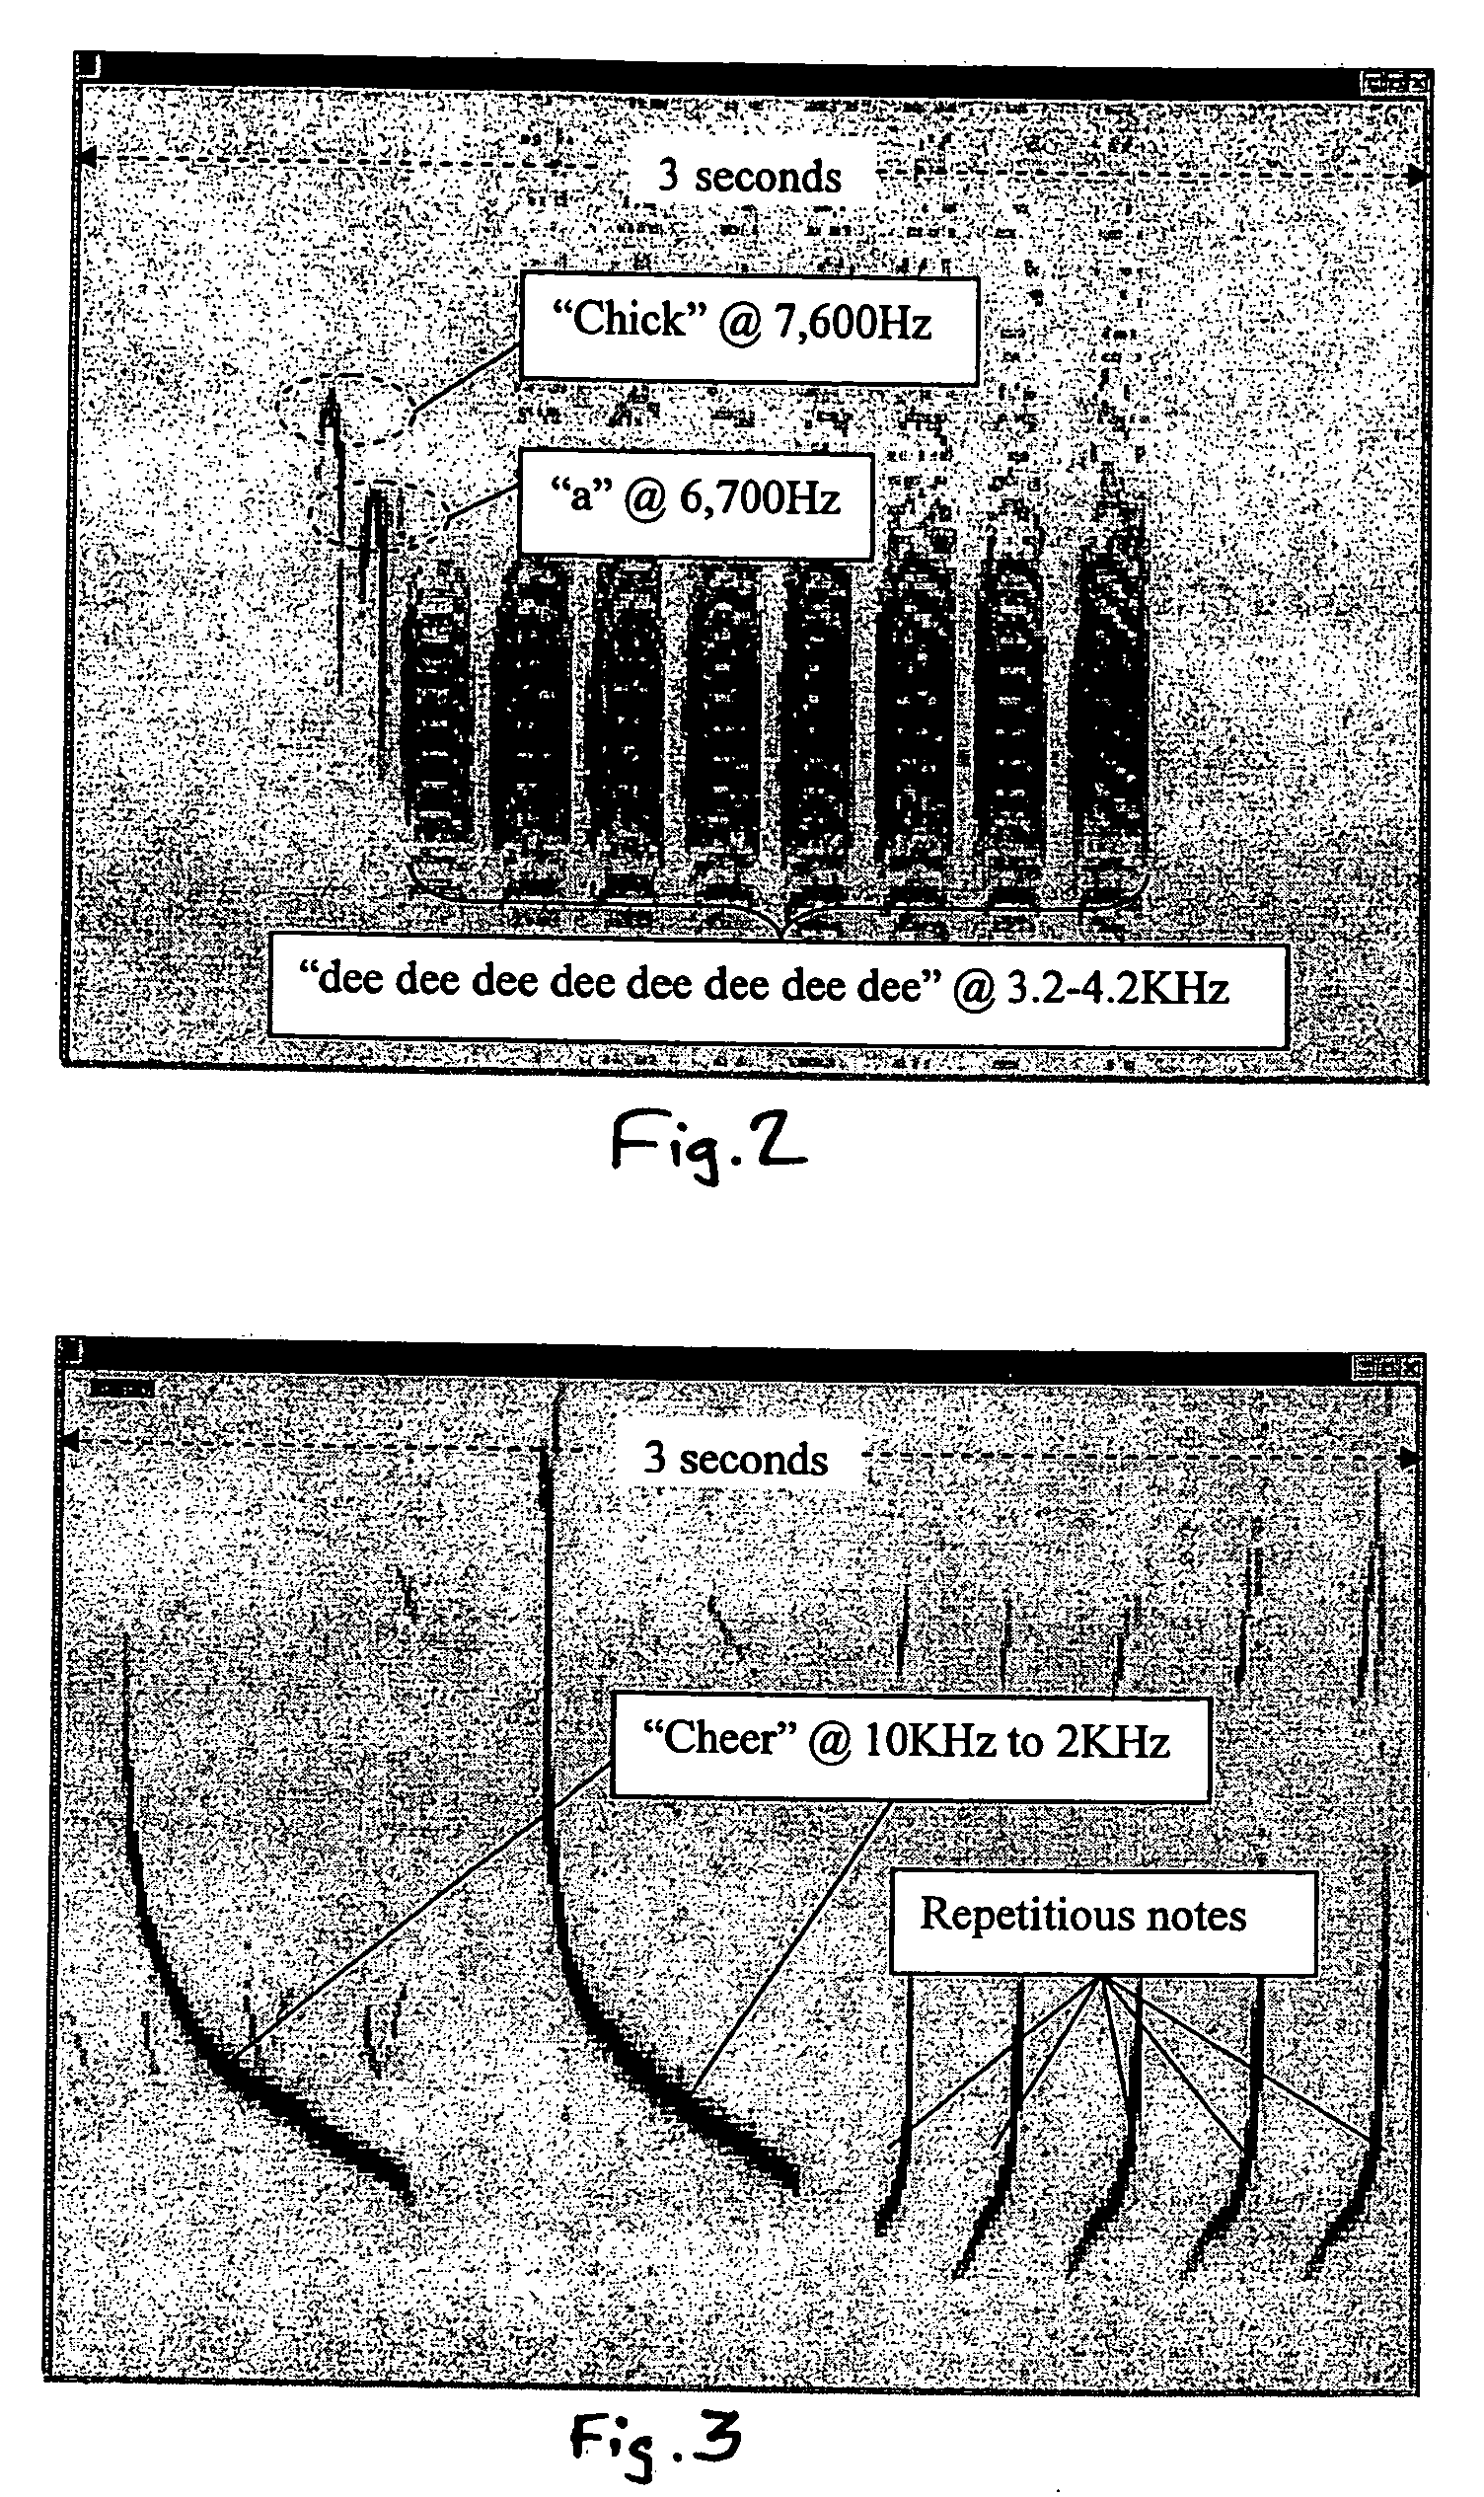 Method and apparatus for automatically identifying animal species from their vocalizations